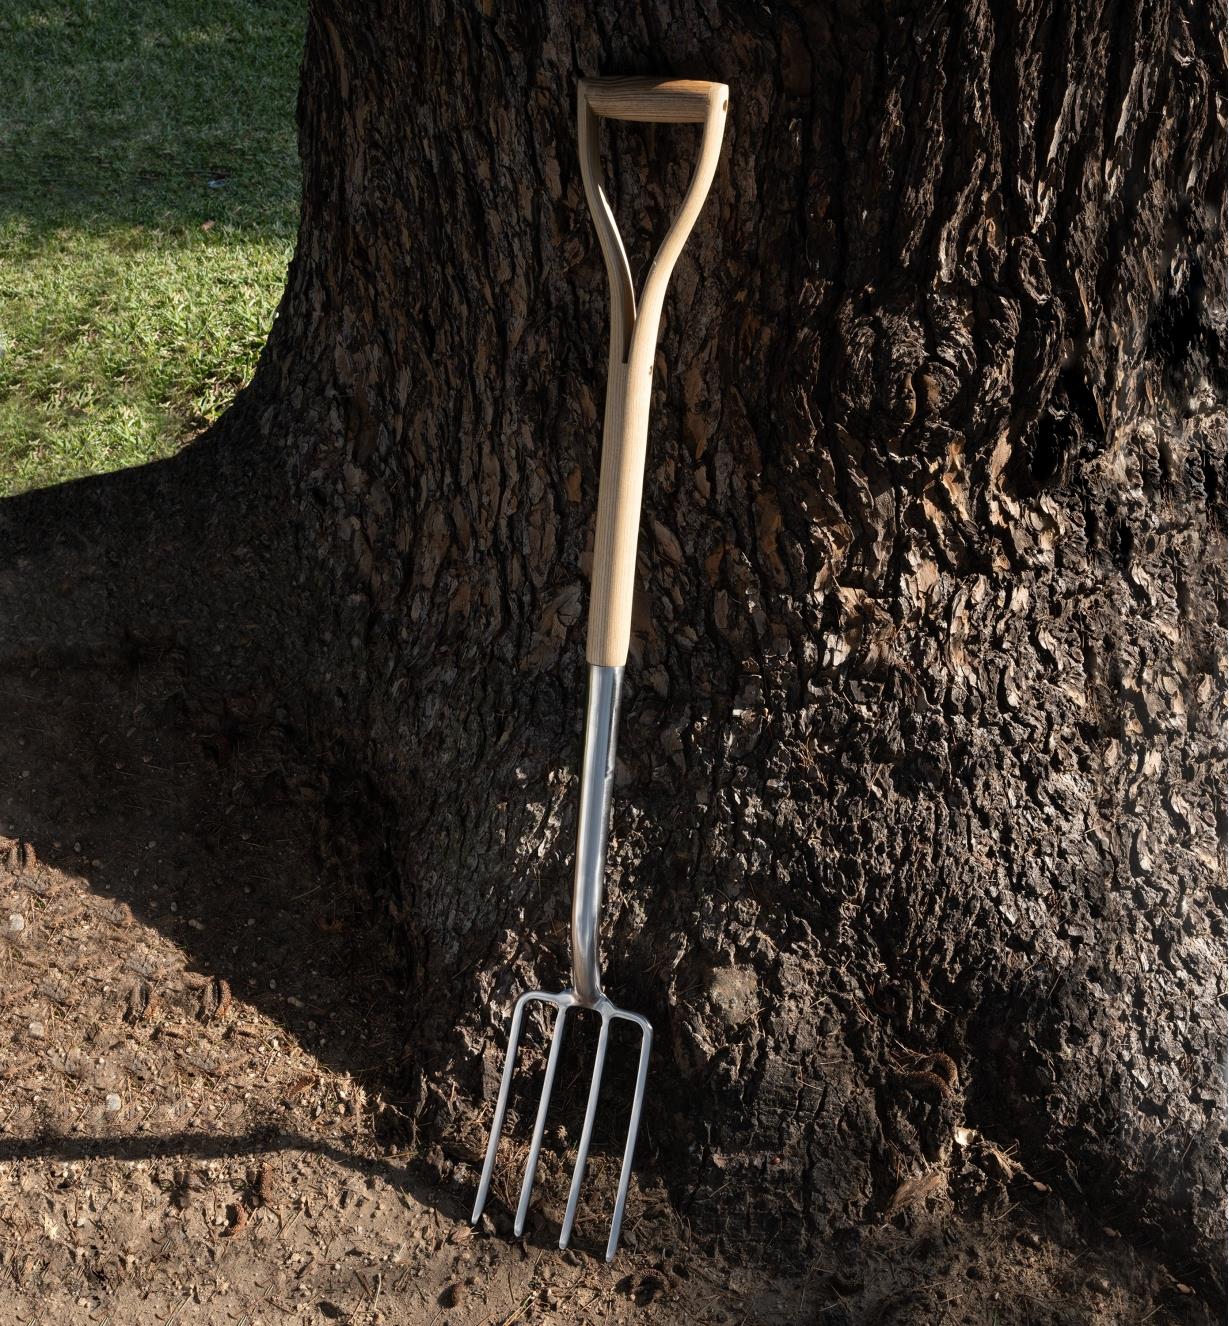 The border fork leaning up against a tree